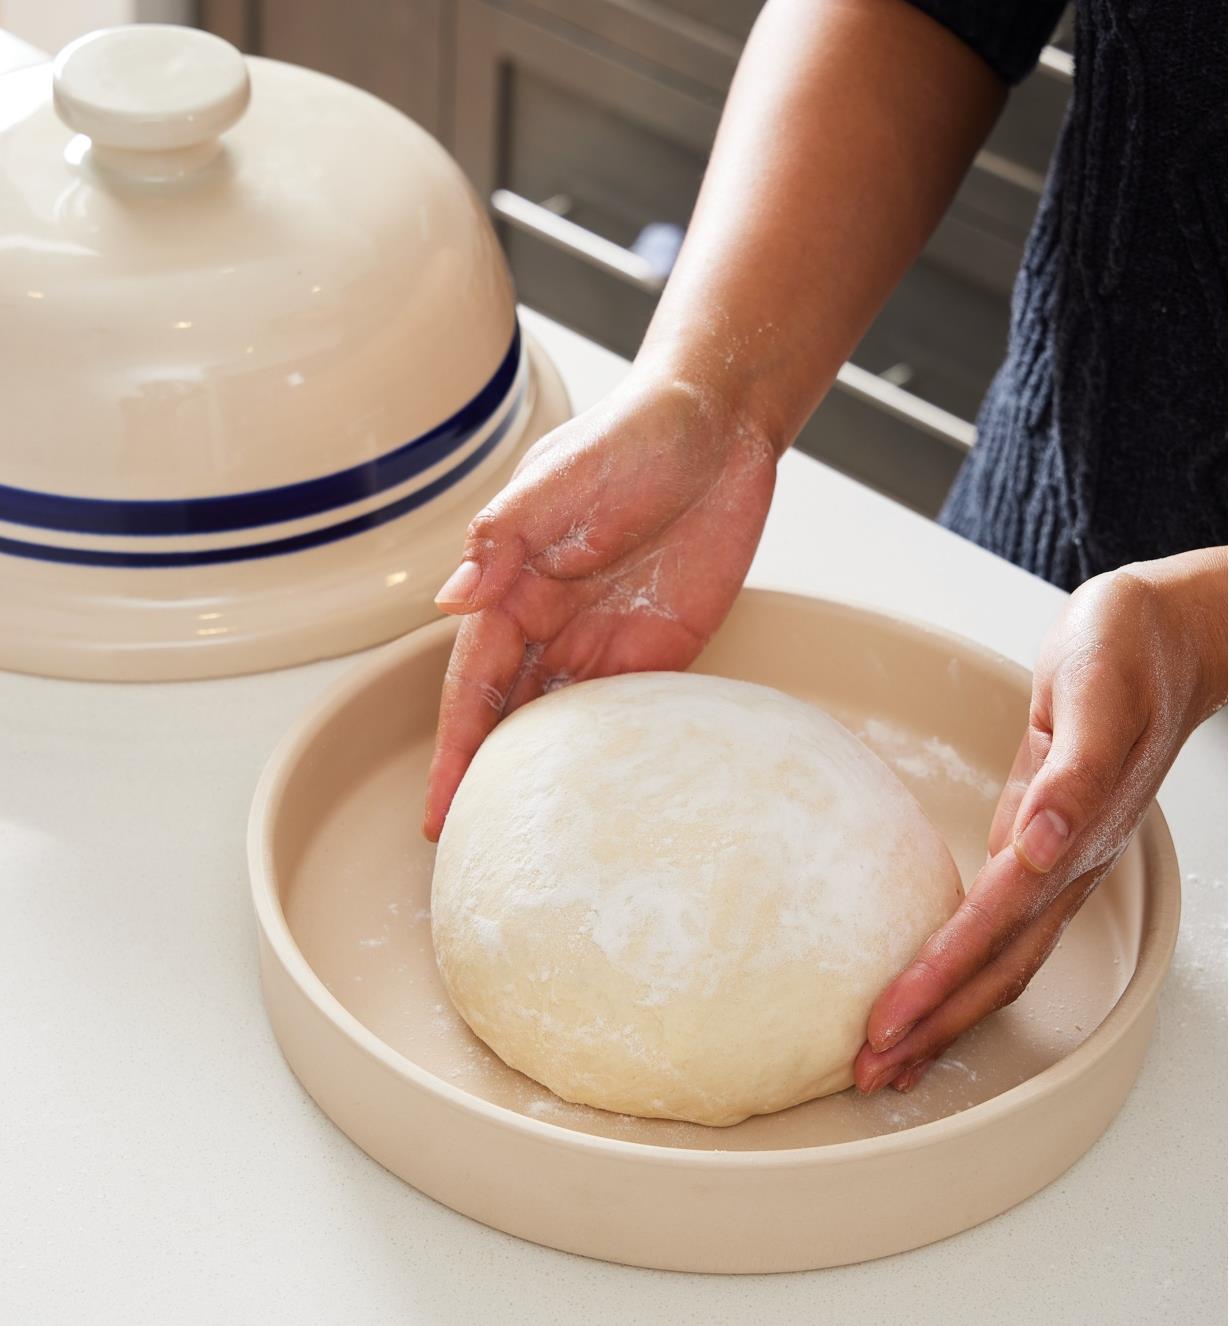 Placing bread dough in the base of the bread-baking cloche